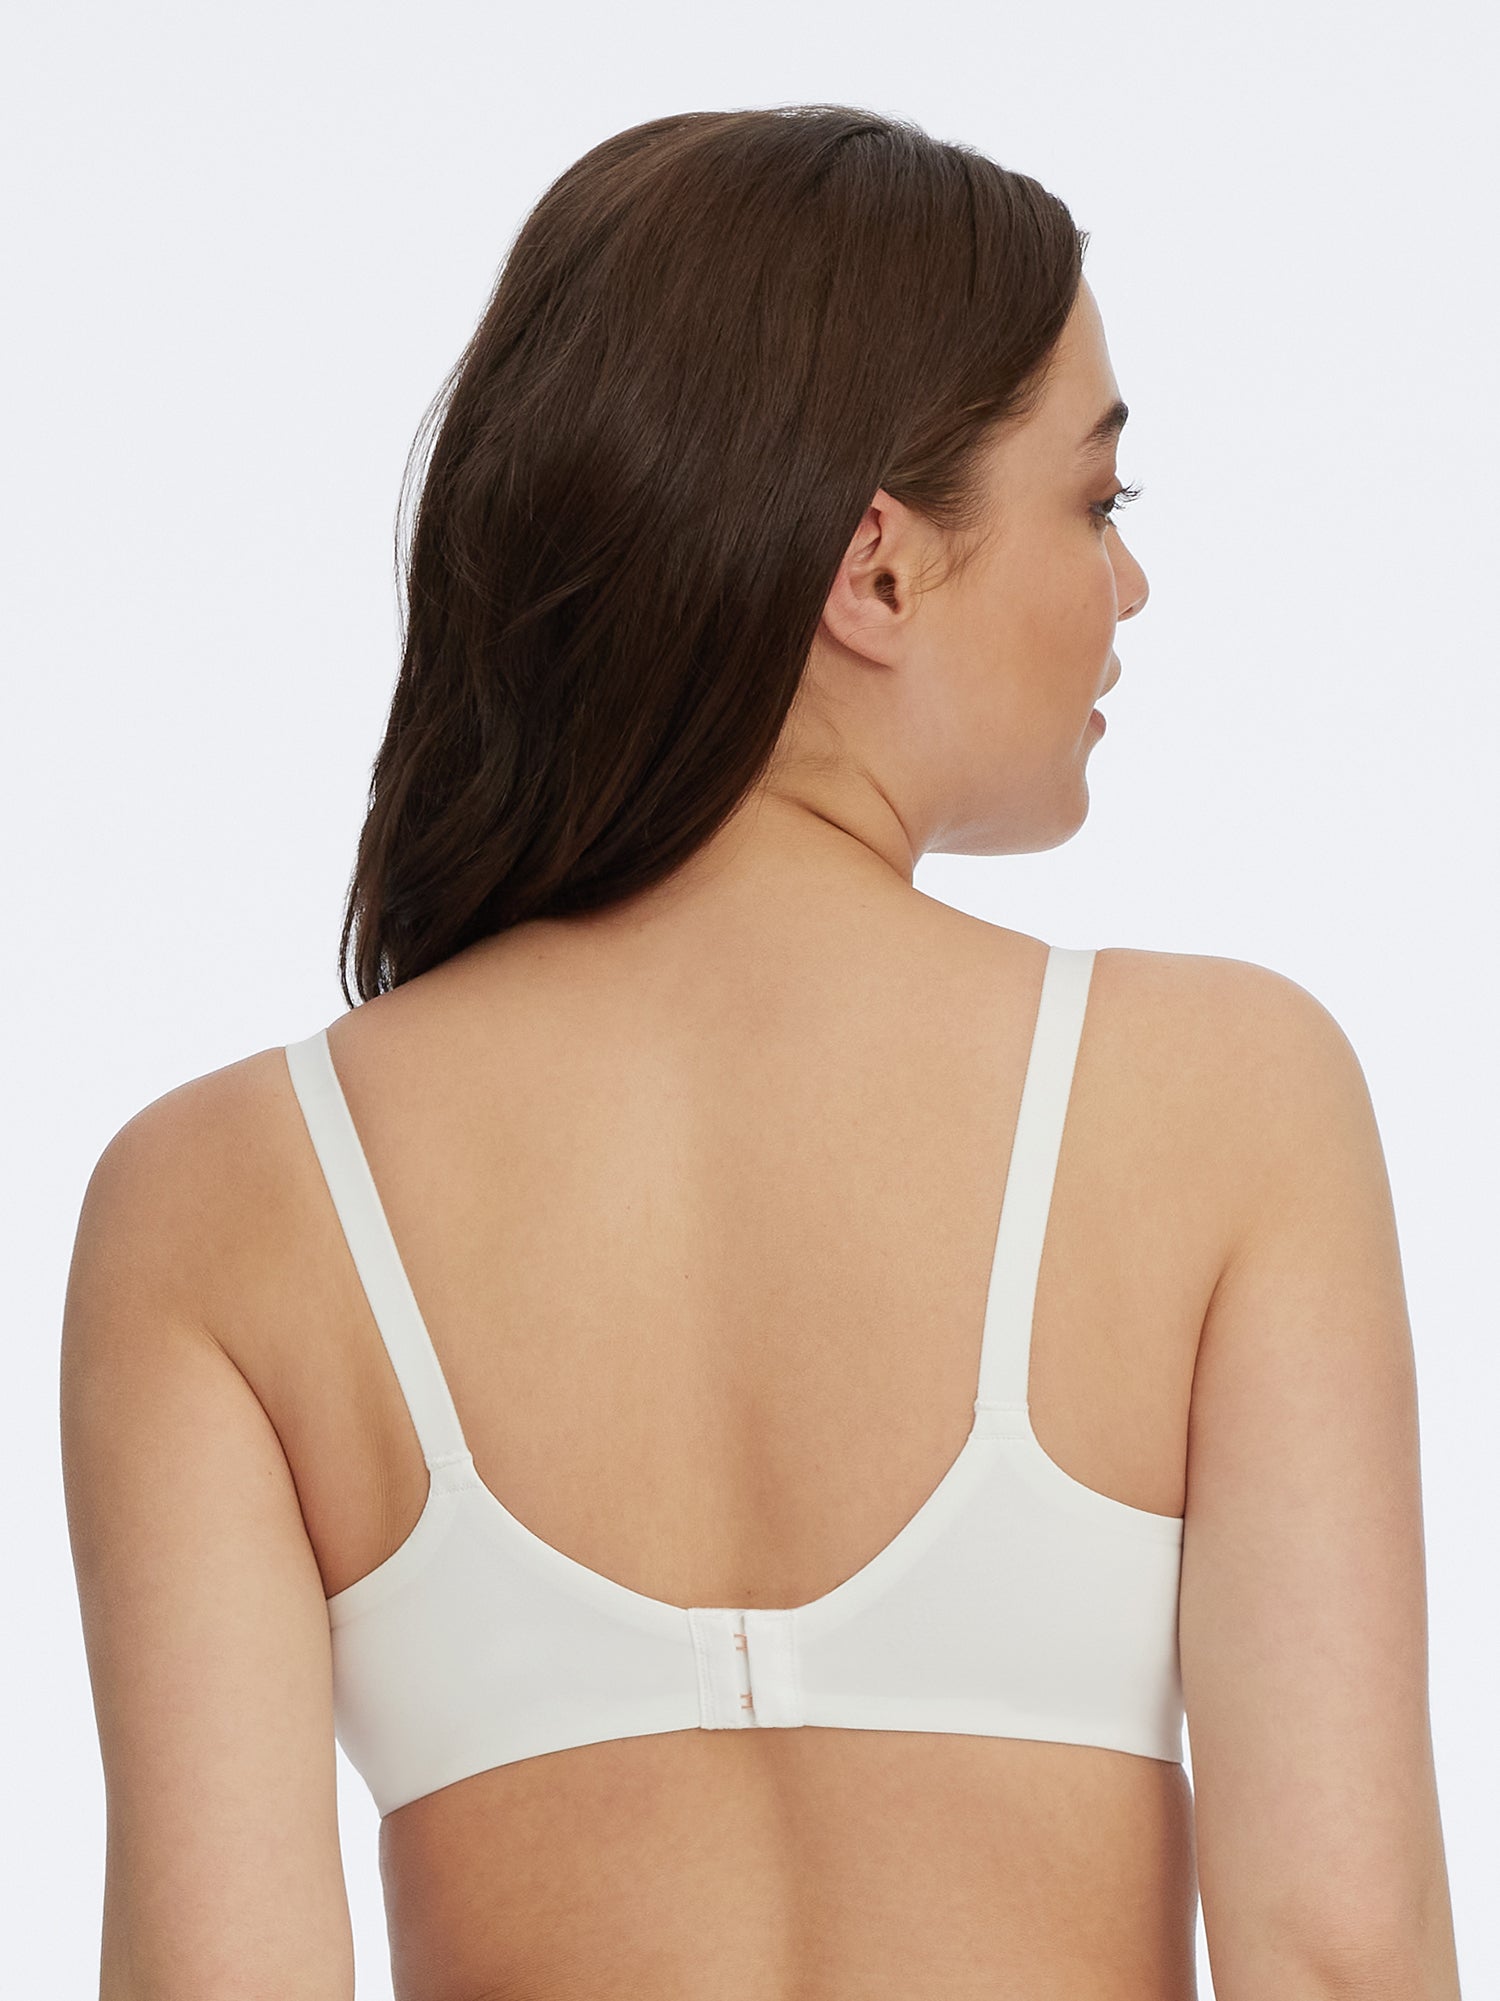 Lurex Lace Underwire Bra - For Her from The Luxe Company UK